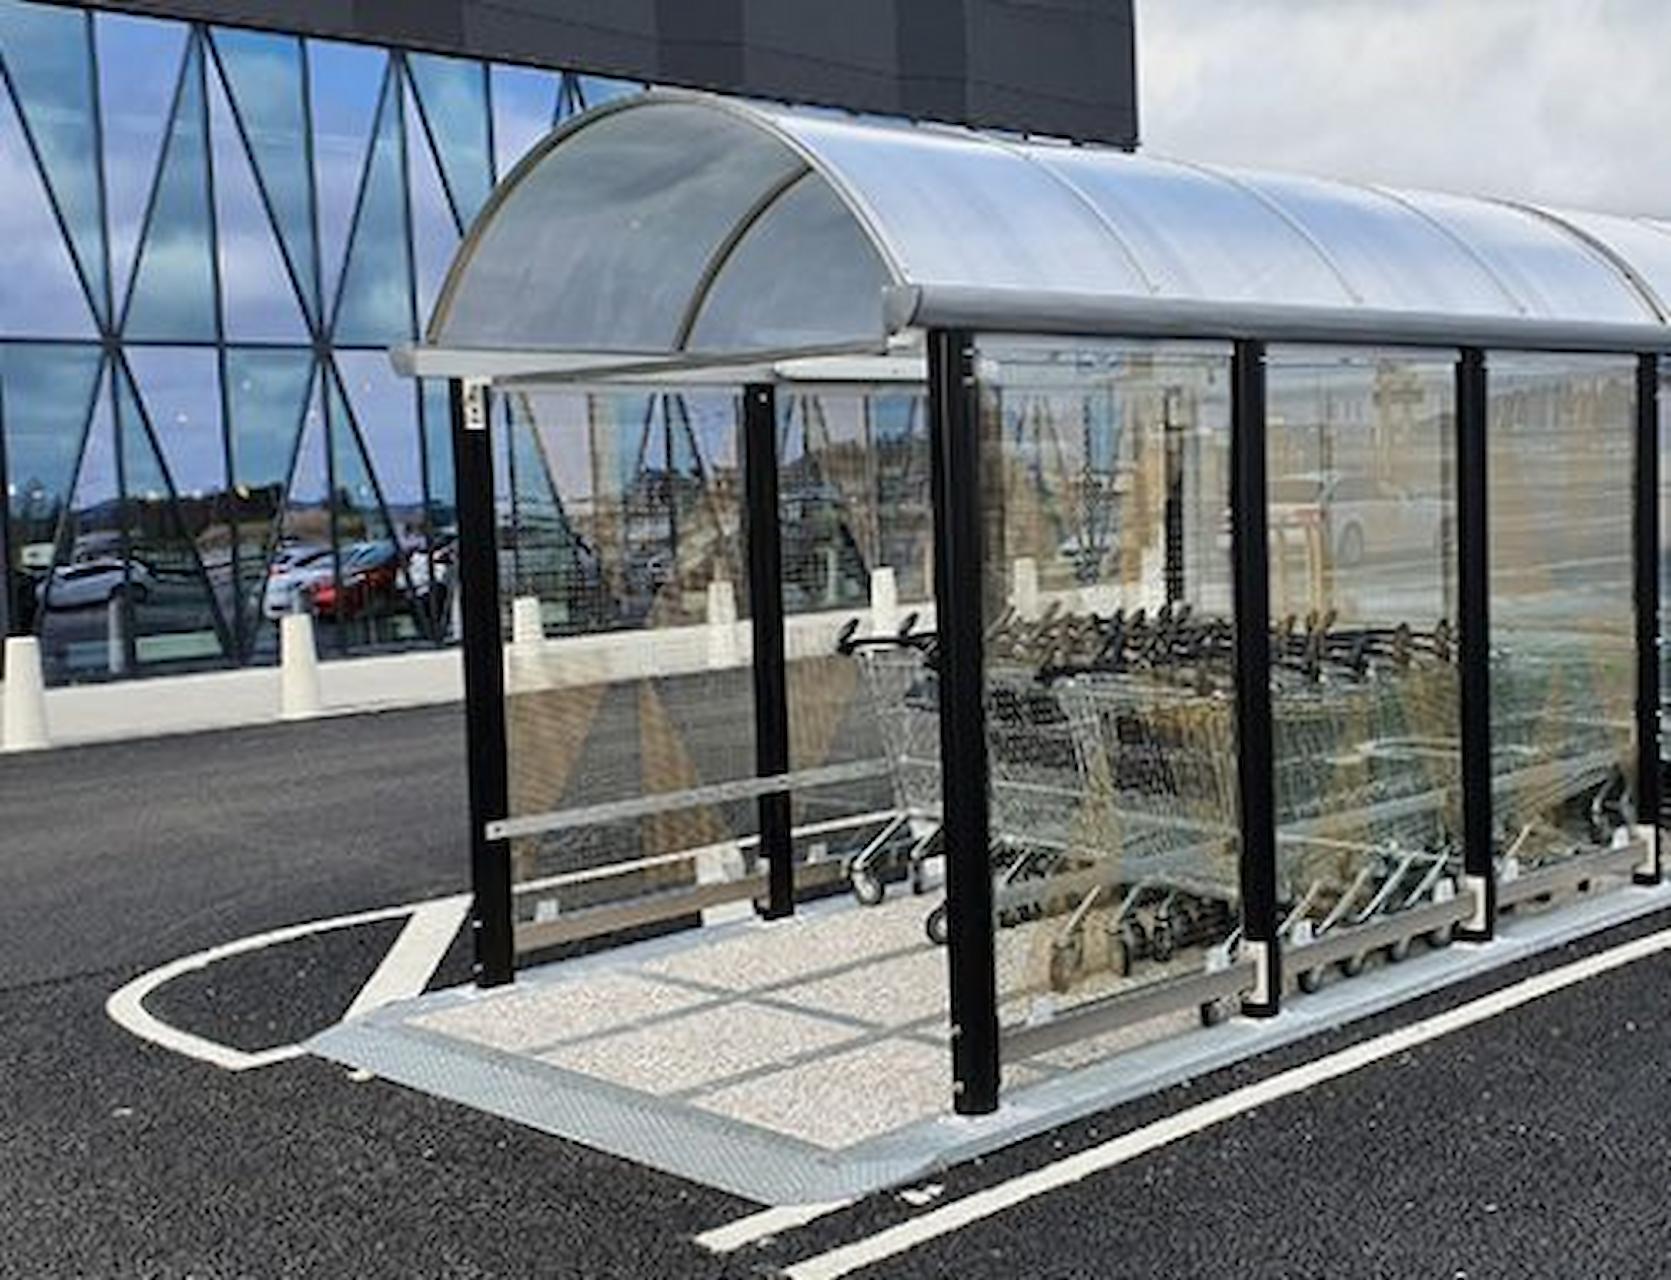 A Step By Step Guide for Installing a Trolley Shelter